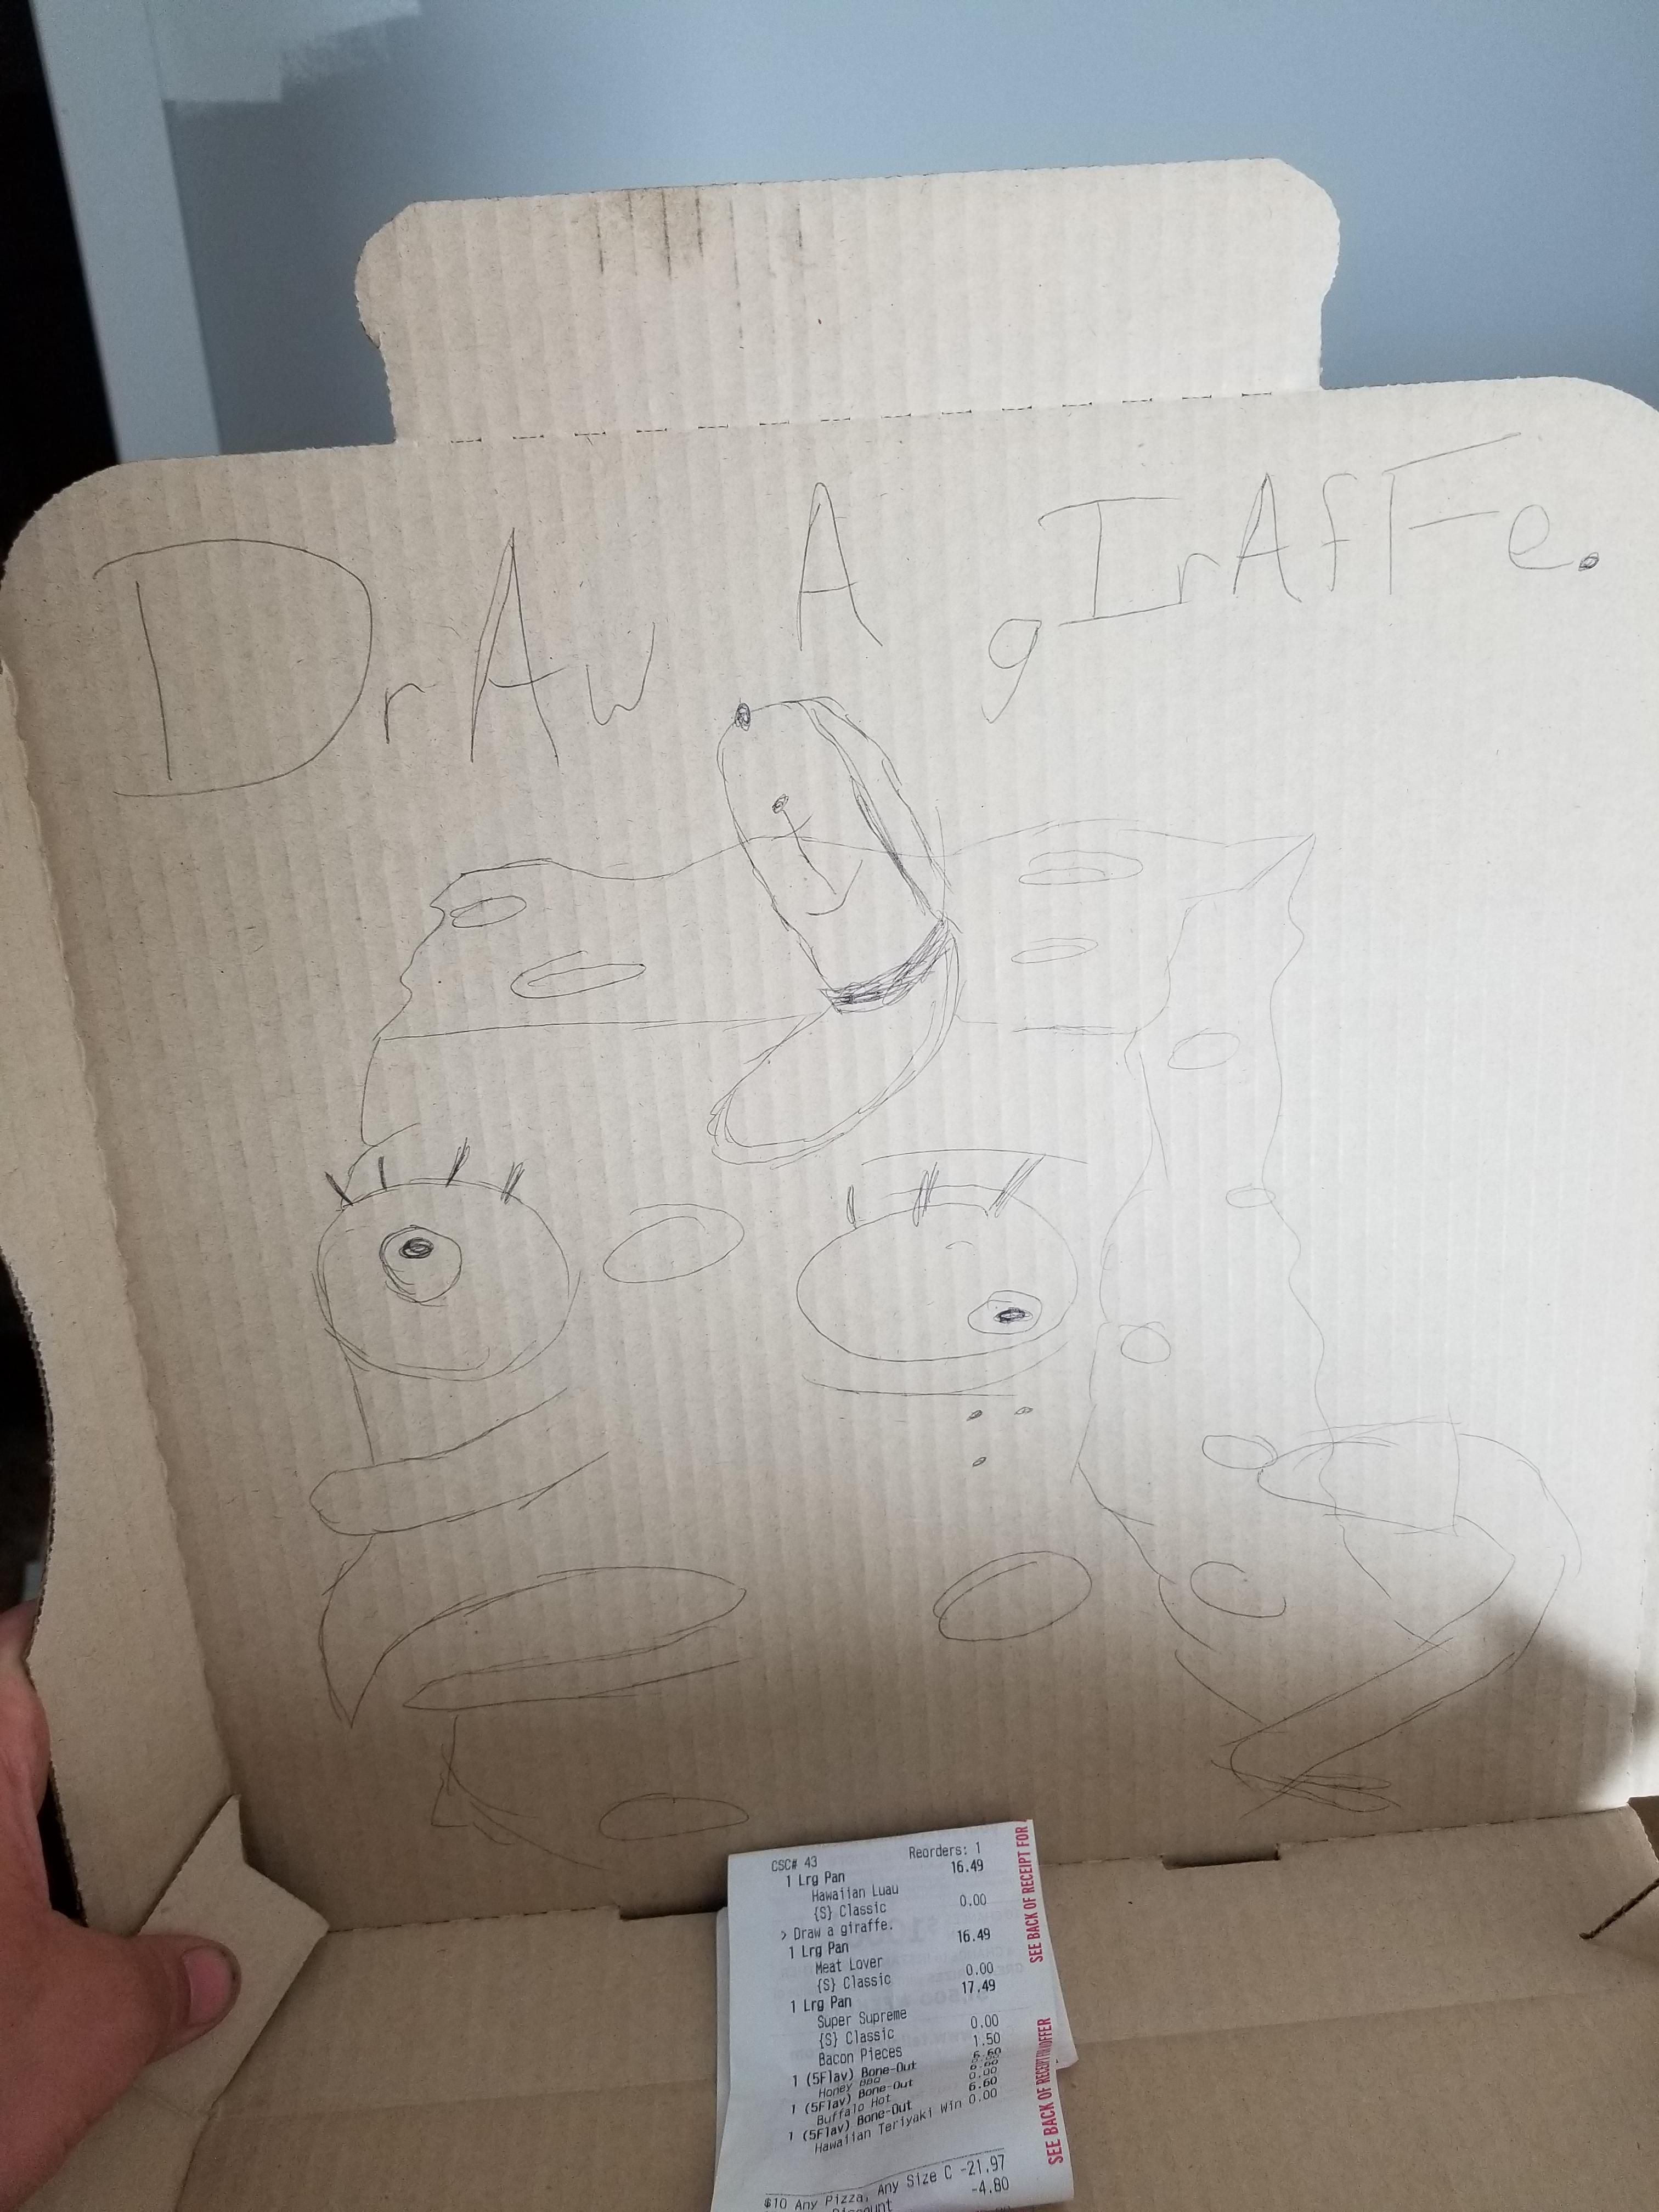 I ordered pizza and asked for a giraffe, but got a meme.